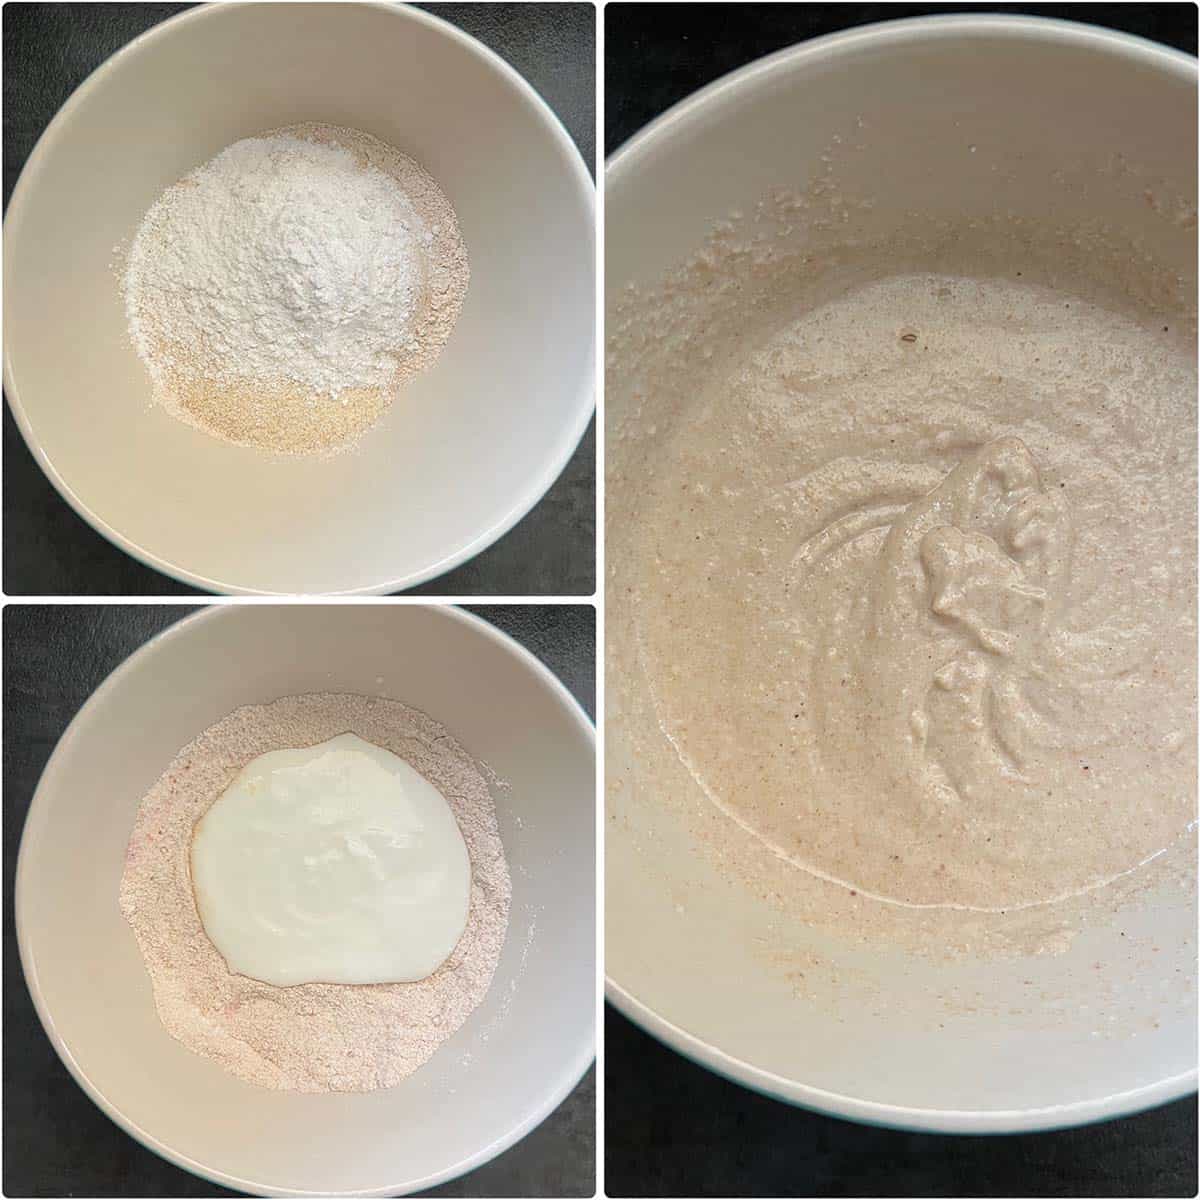 3 panel photo showing the mixing of ingredients for the batter.